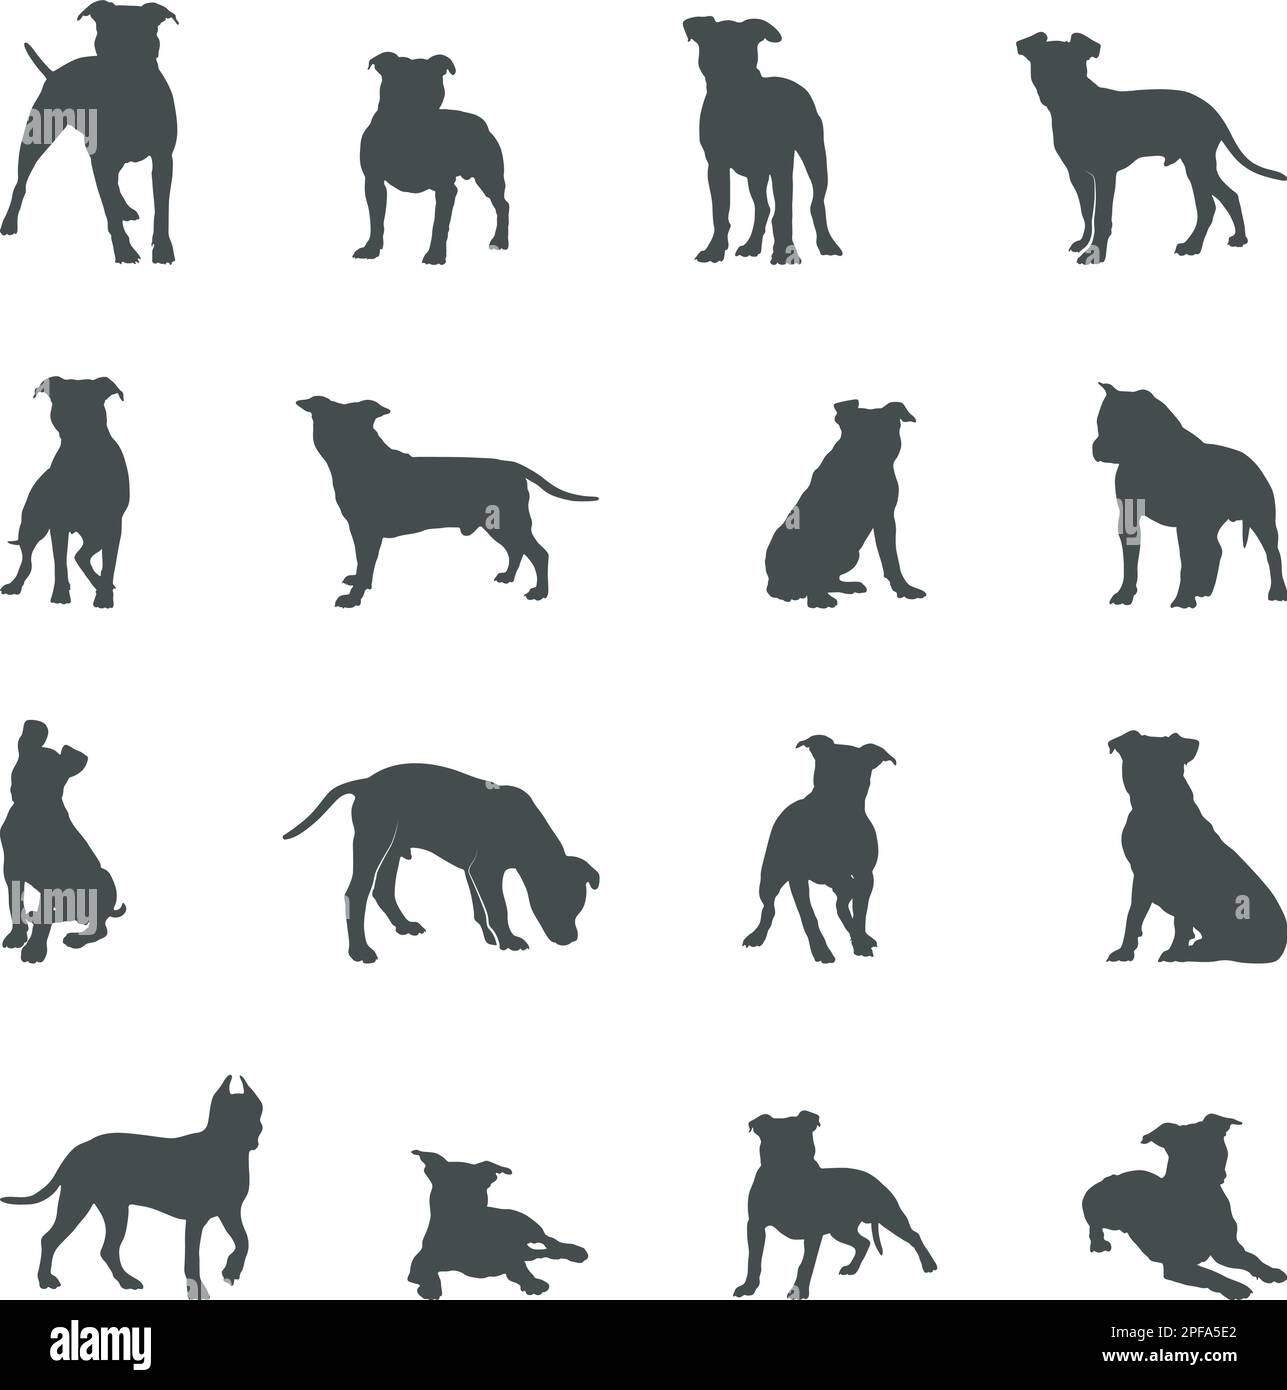 American Staffordshire terrier silhouettes, Staffordshire terrier silhouette Stock Vector